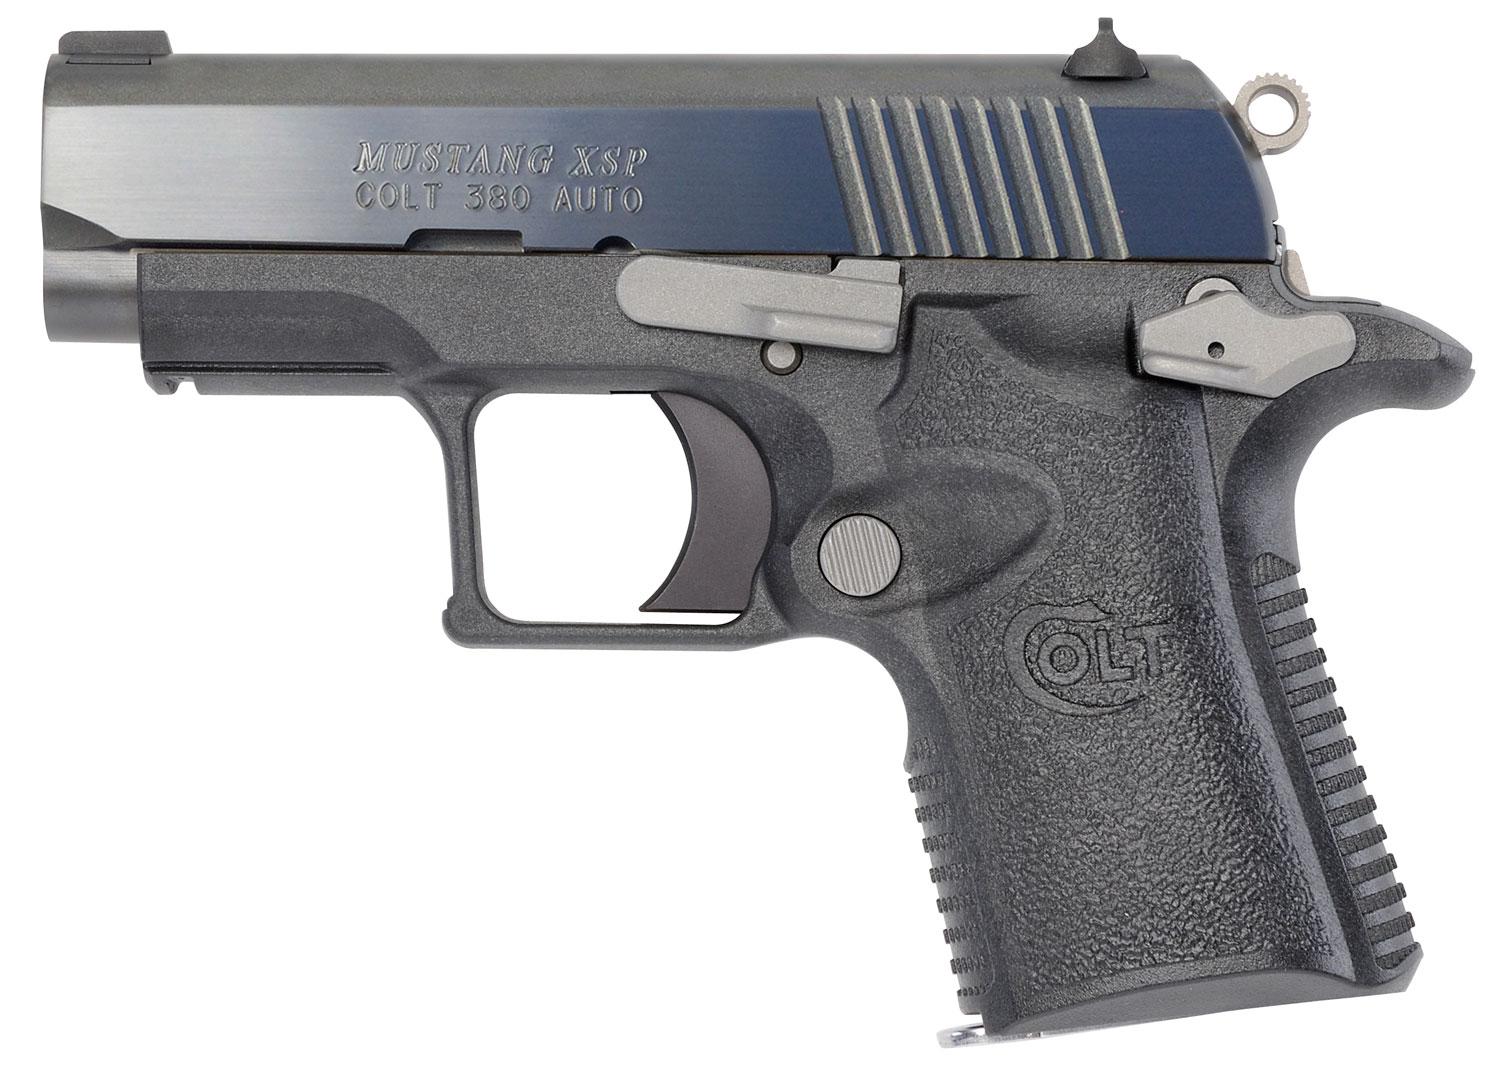 Colt Mustang Single Action Pistol, 380 ACP, 2.75 inch, Gray Polymer Grip/Fr...